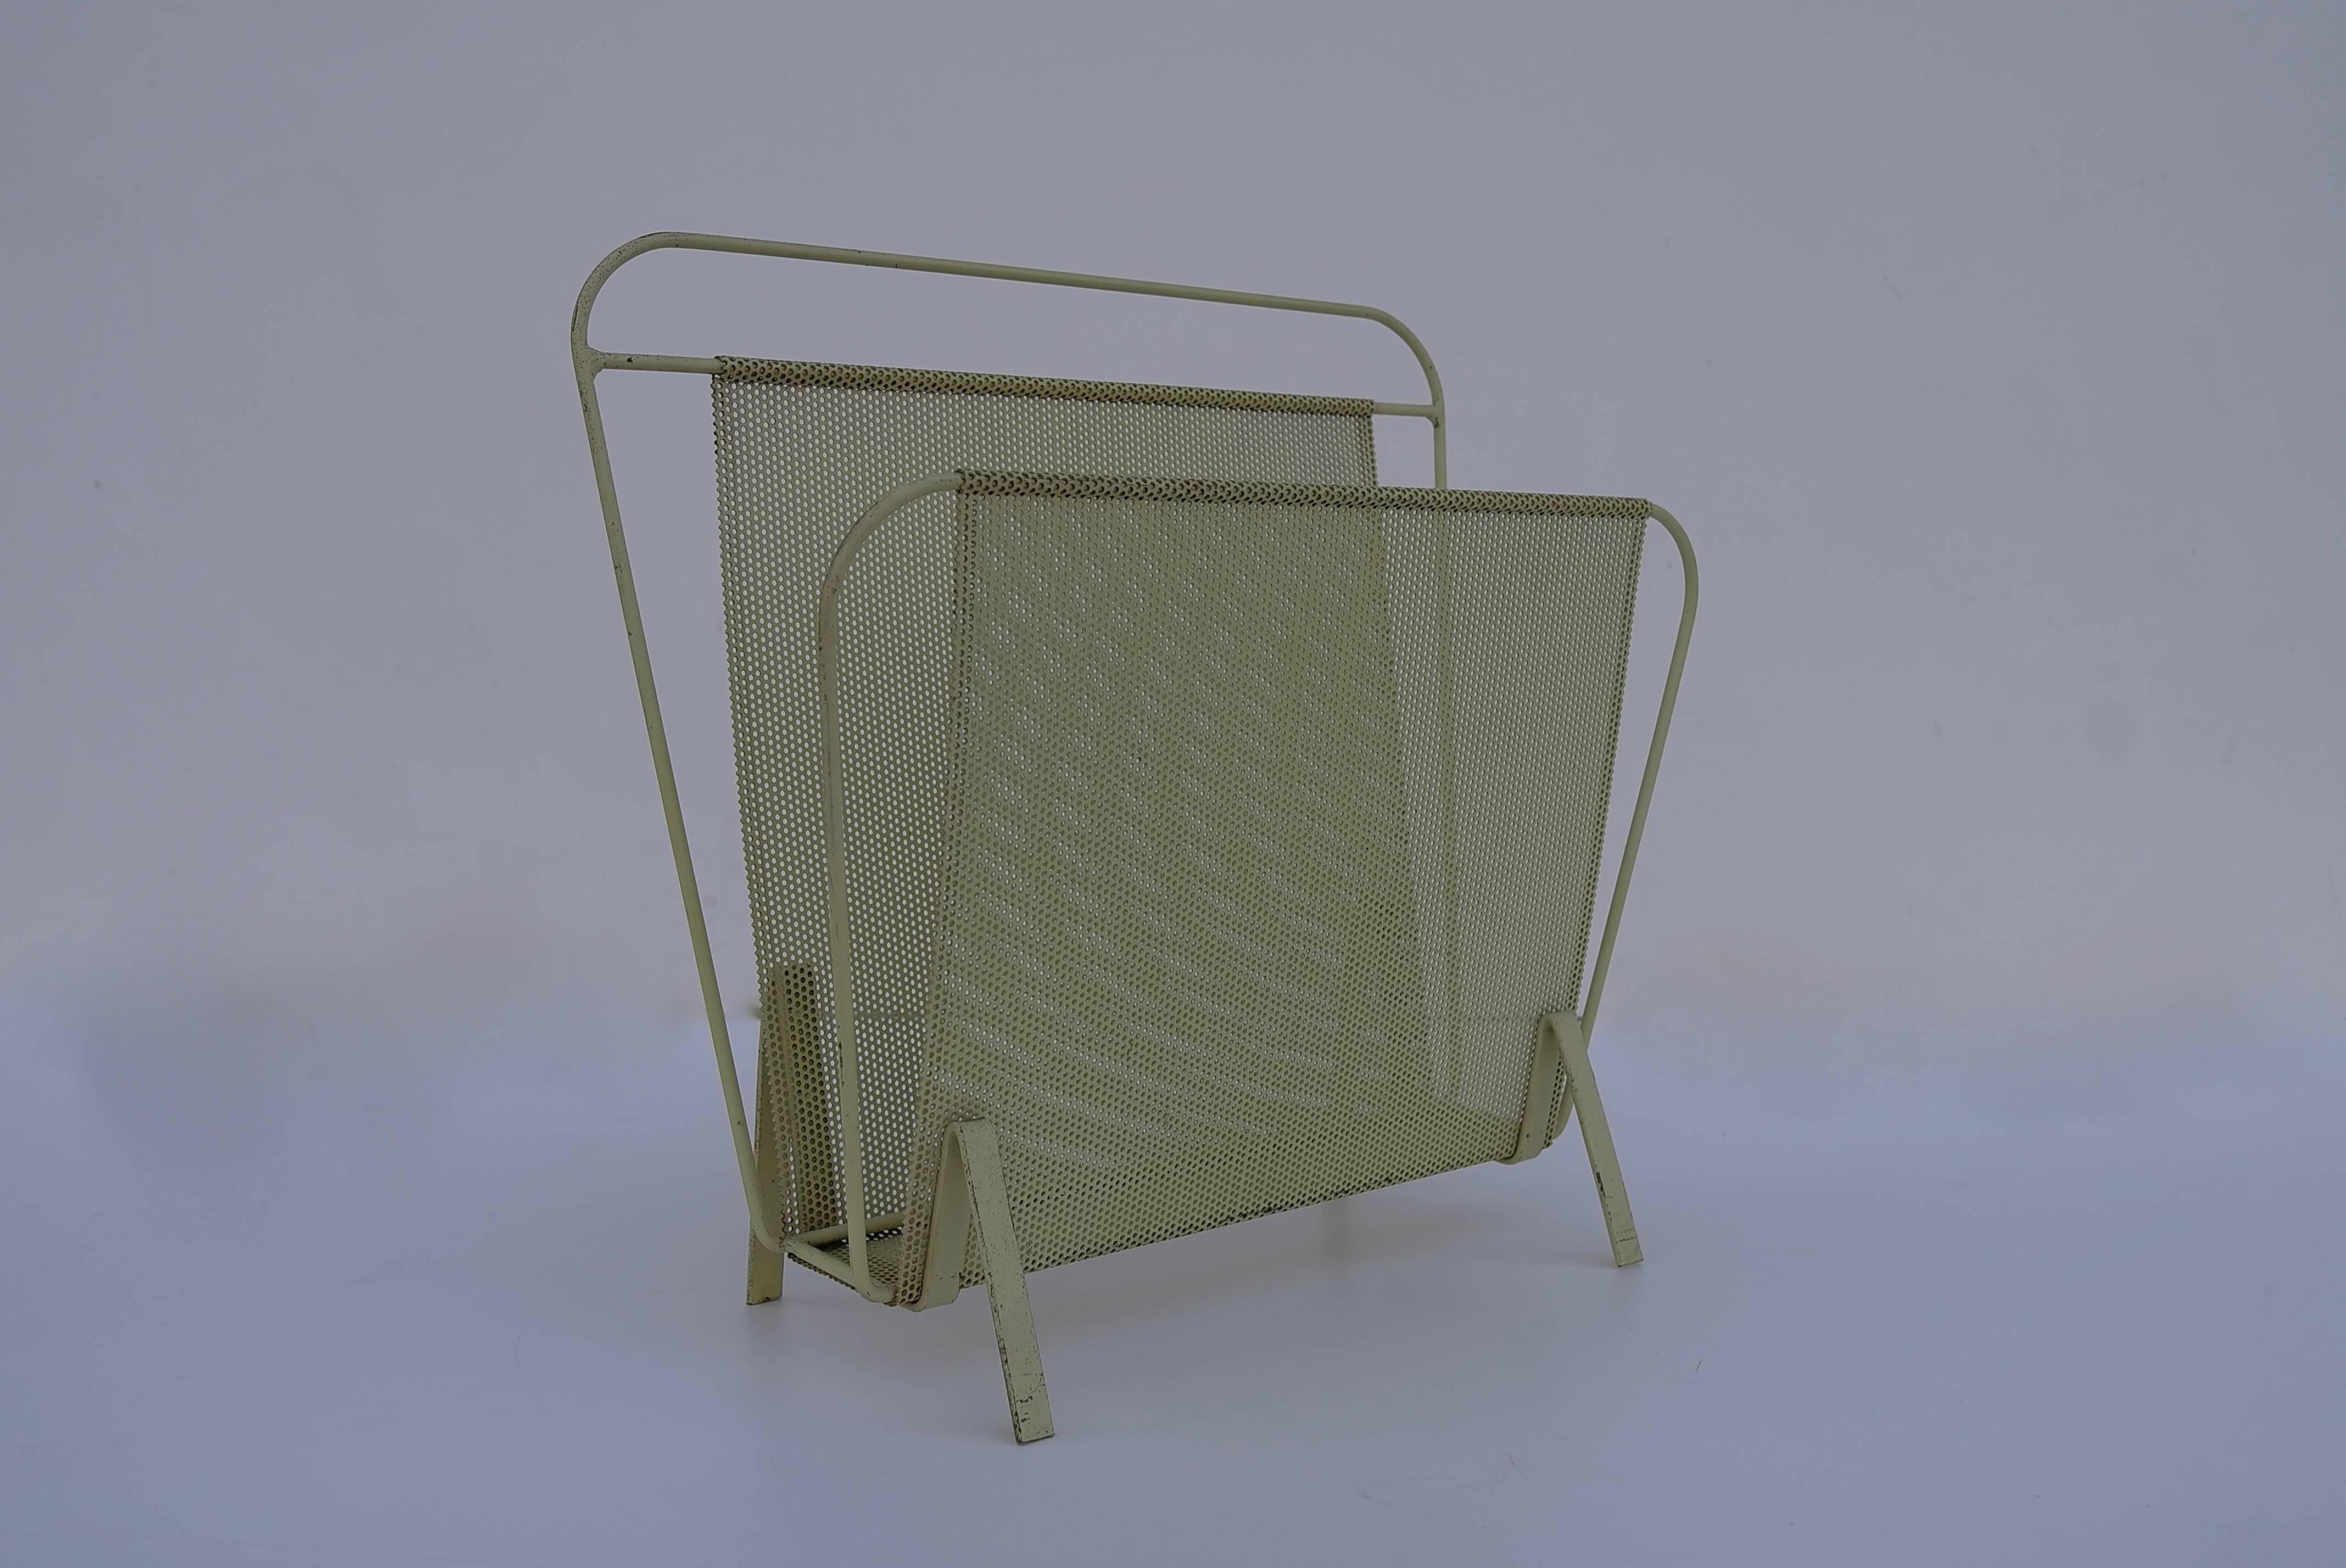 Magazine holder, model Harpers, designed by Mathieu Matégot and florid fiedeldij in rare yellow. Manufactured by Artimeta (Netherlands,) circa 1950. Folded, perforated metal. Designed in collaboration with Floris H. Fiedeldij together with Mathieu